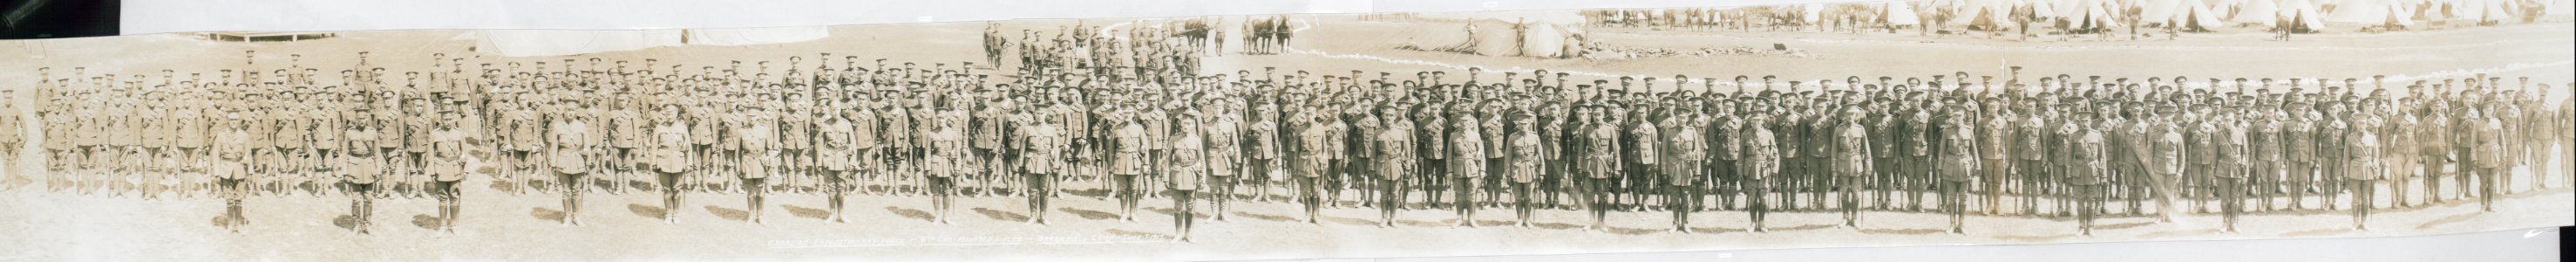 8th Mounted Rifles, Barriefield Camp (HS85-10-30560) photo